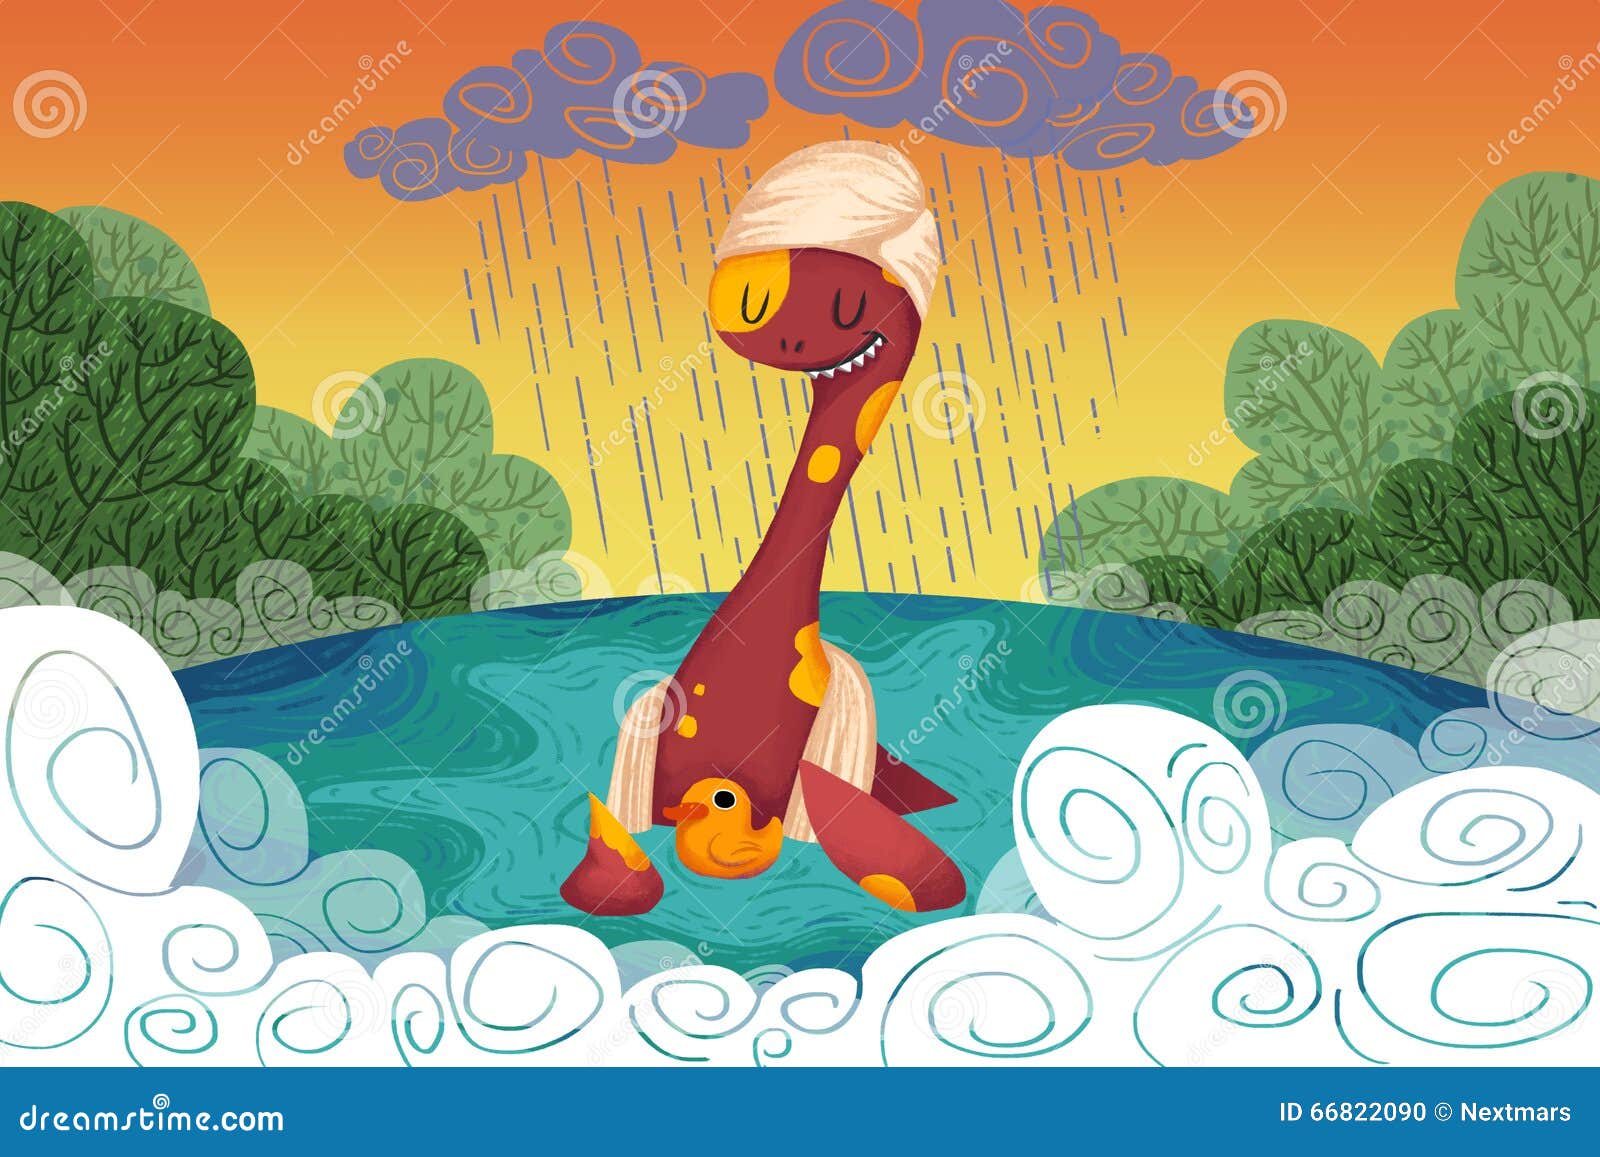  for children: the loch ness monster provides the yellow duck a safe haven when it rains.